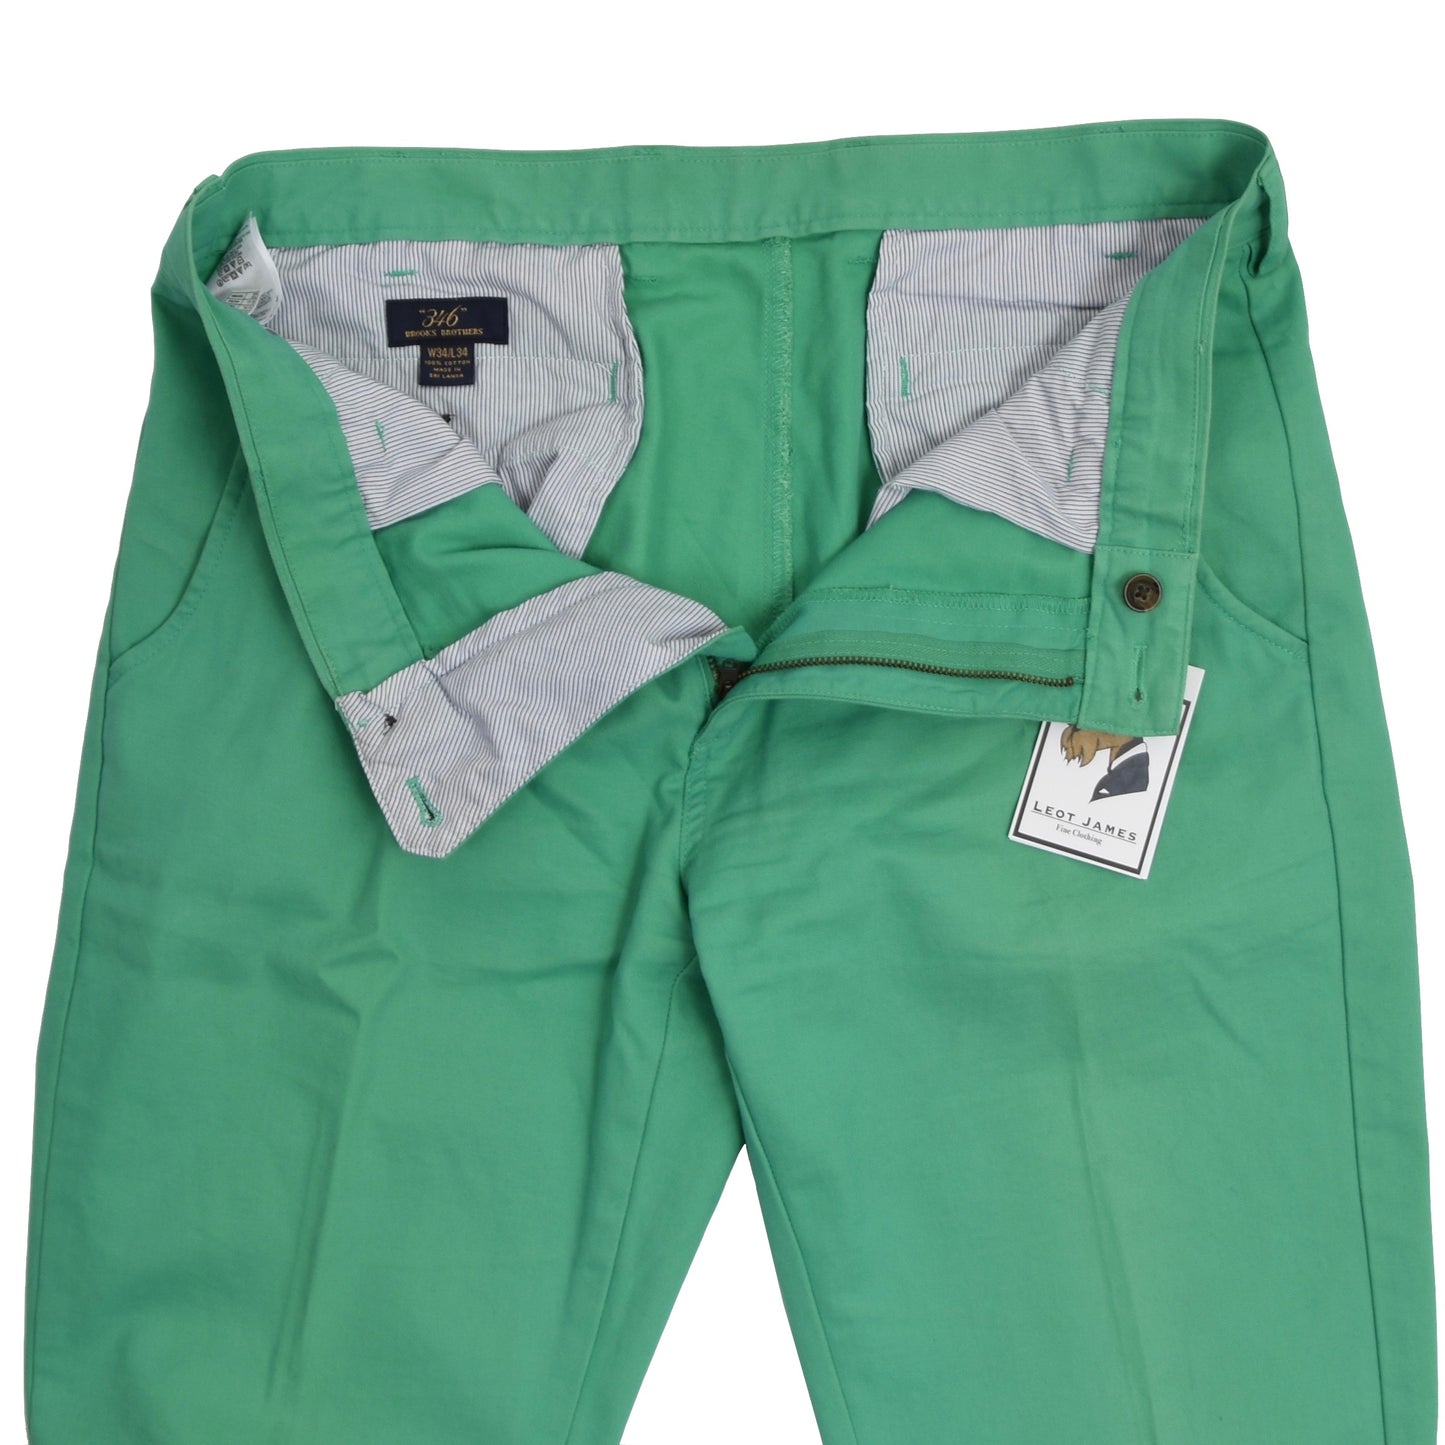 Brooks Brothers Chinos Size W34 L34 - Green